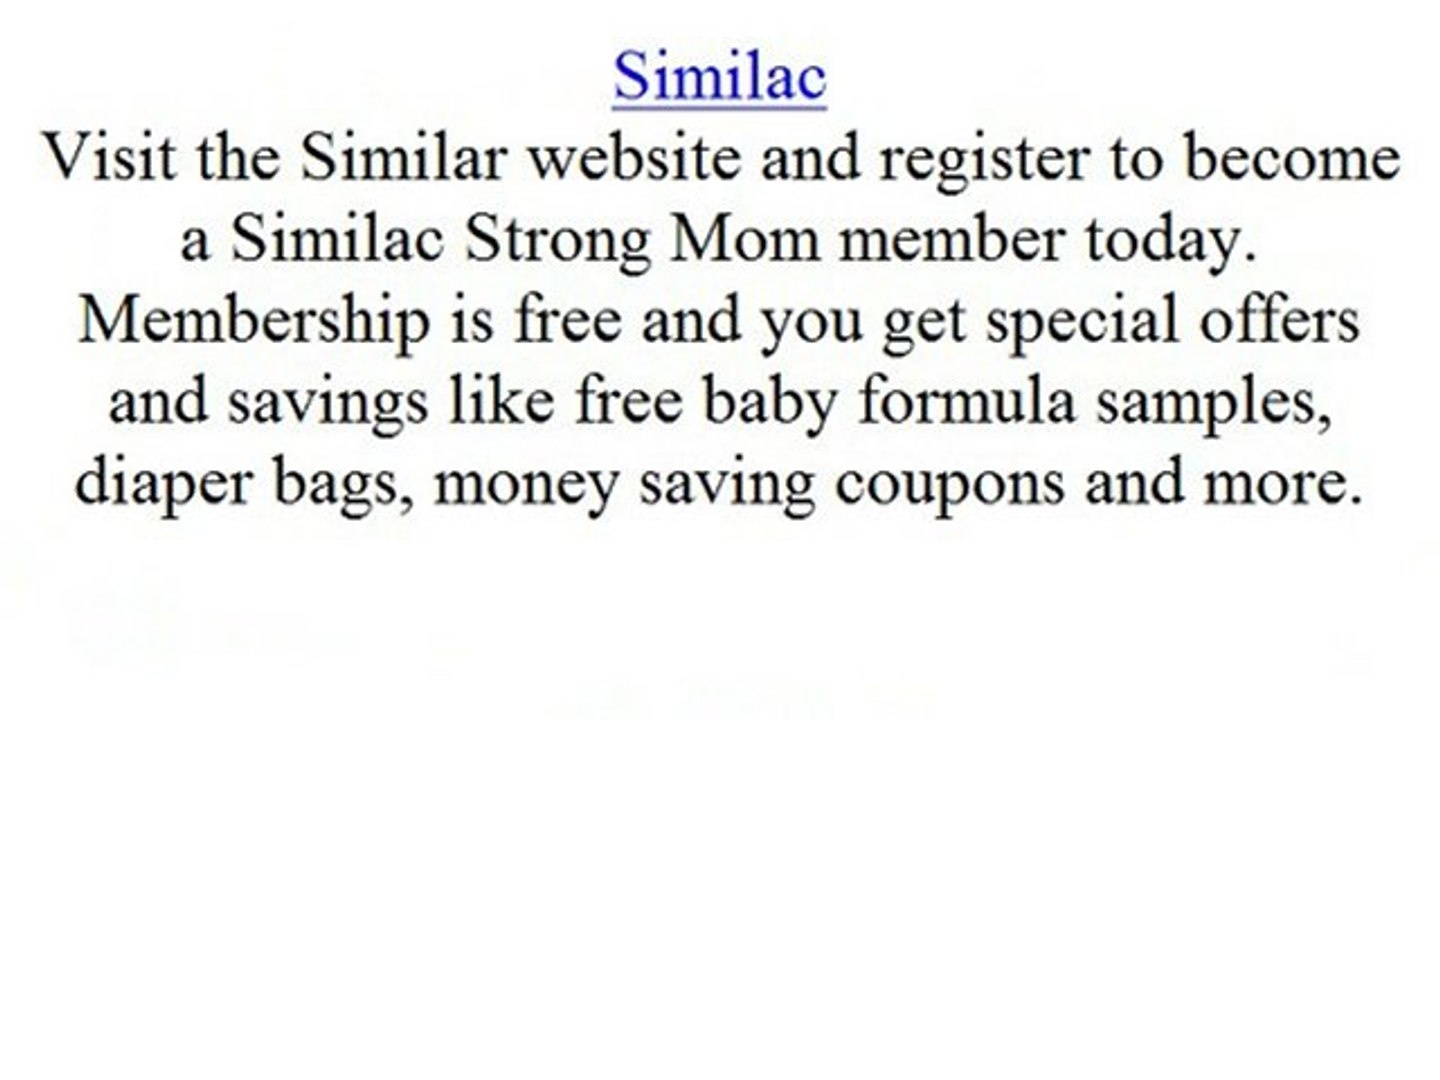 Get Infant Formula Printable Coupons - Video Dailymotion - Free Printable Similac Coupons Online